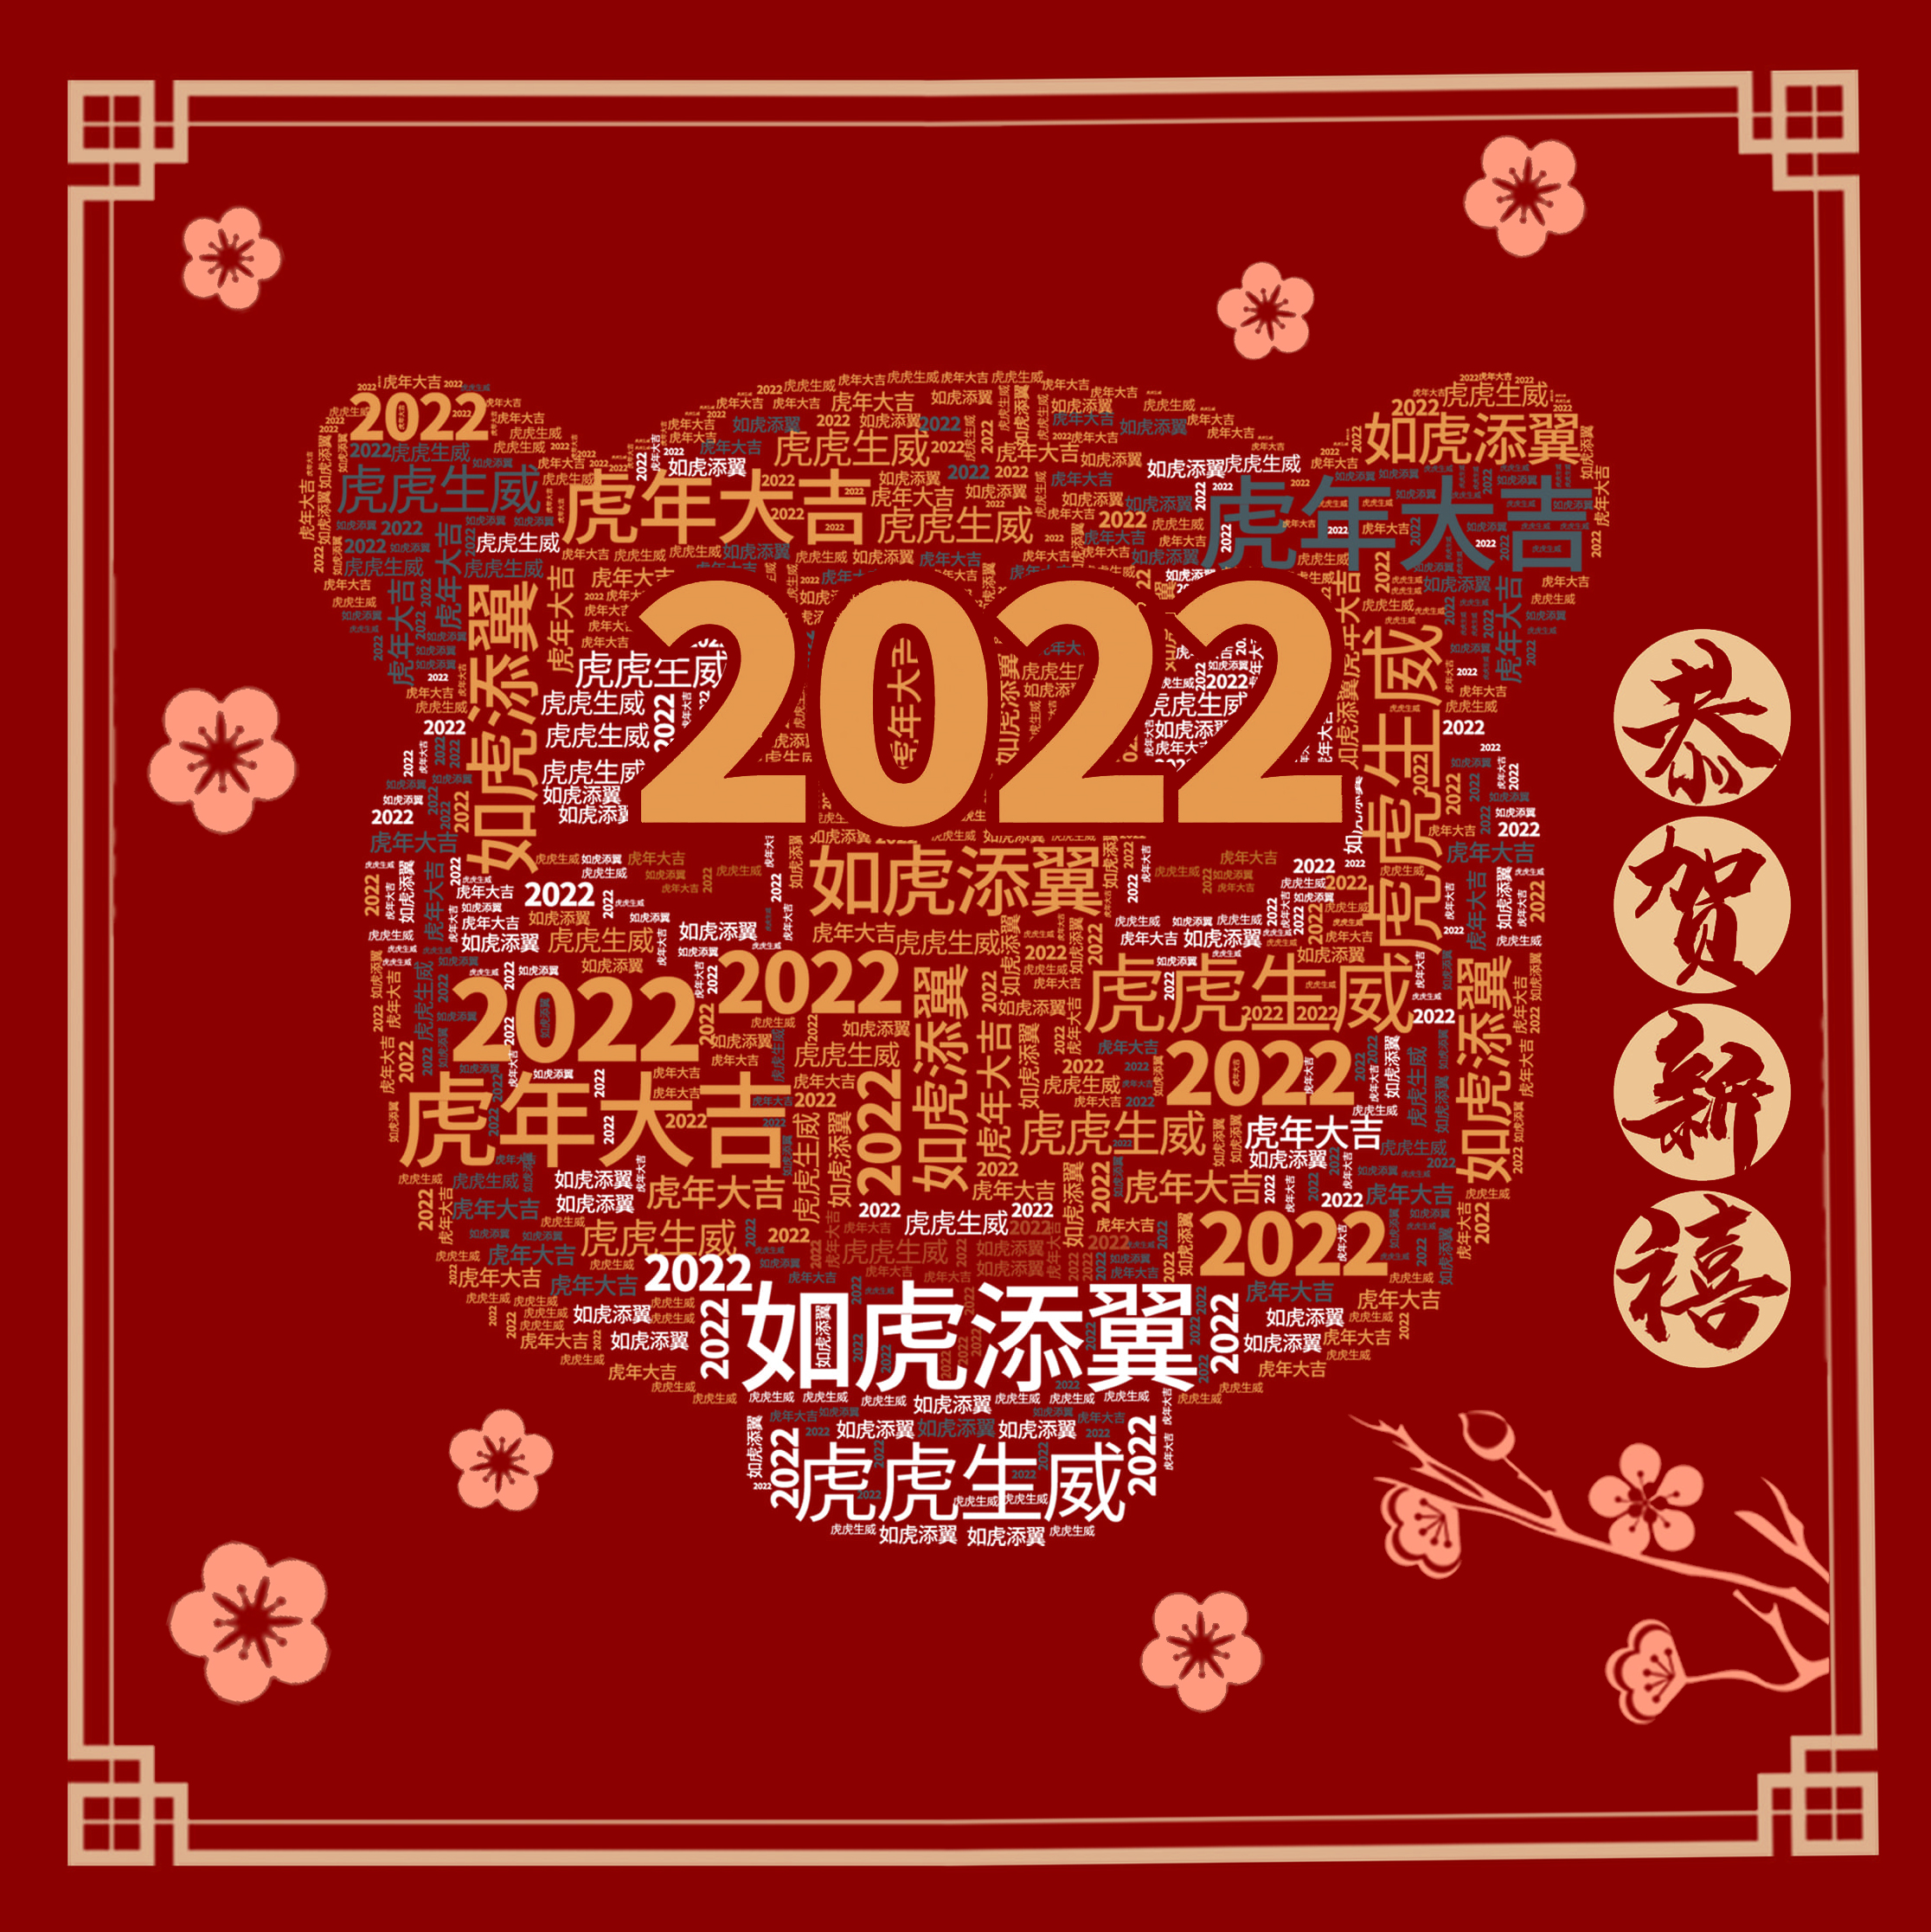 Stylized tiger made up with the number 2022 and chinese characters